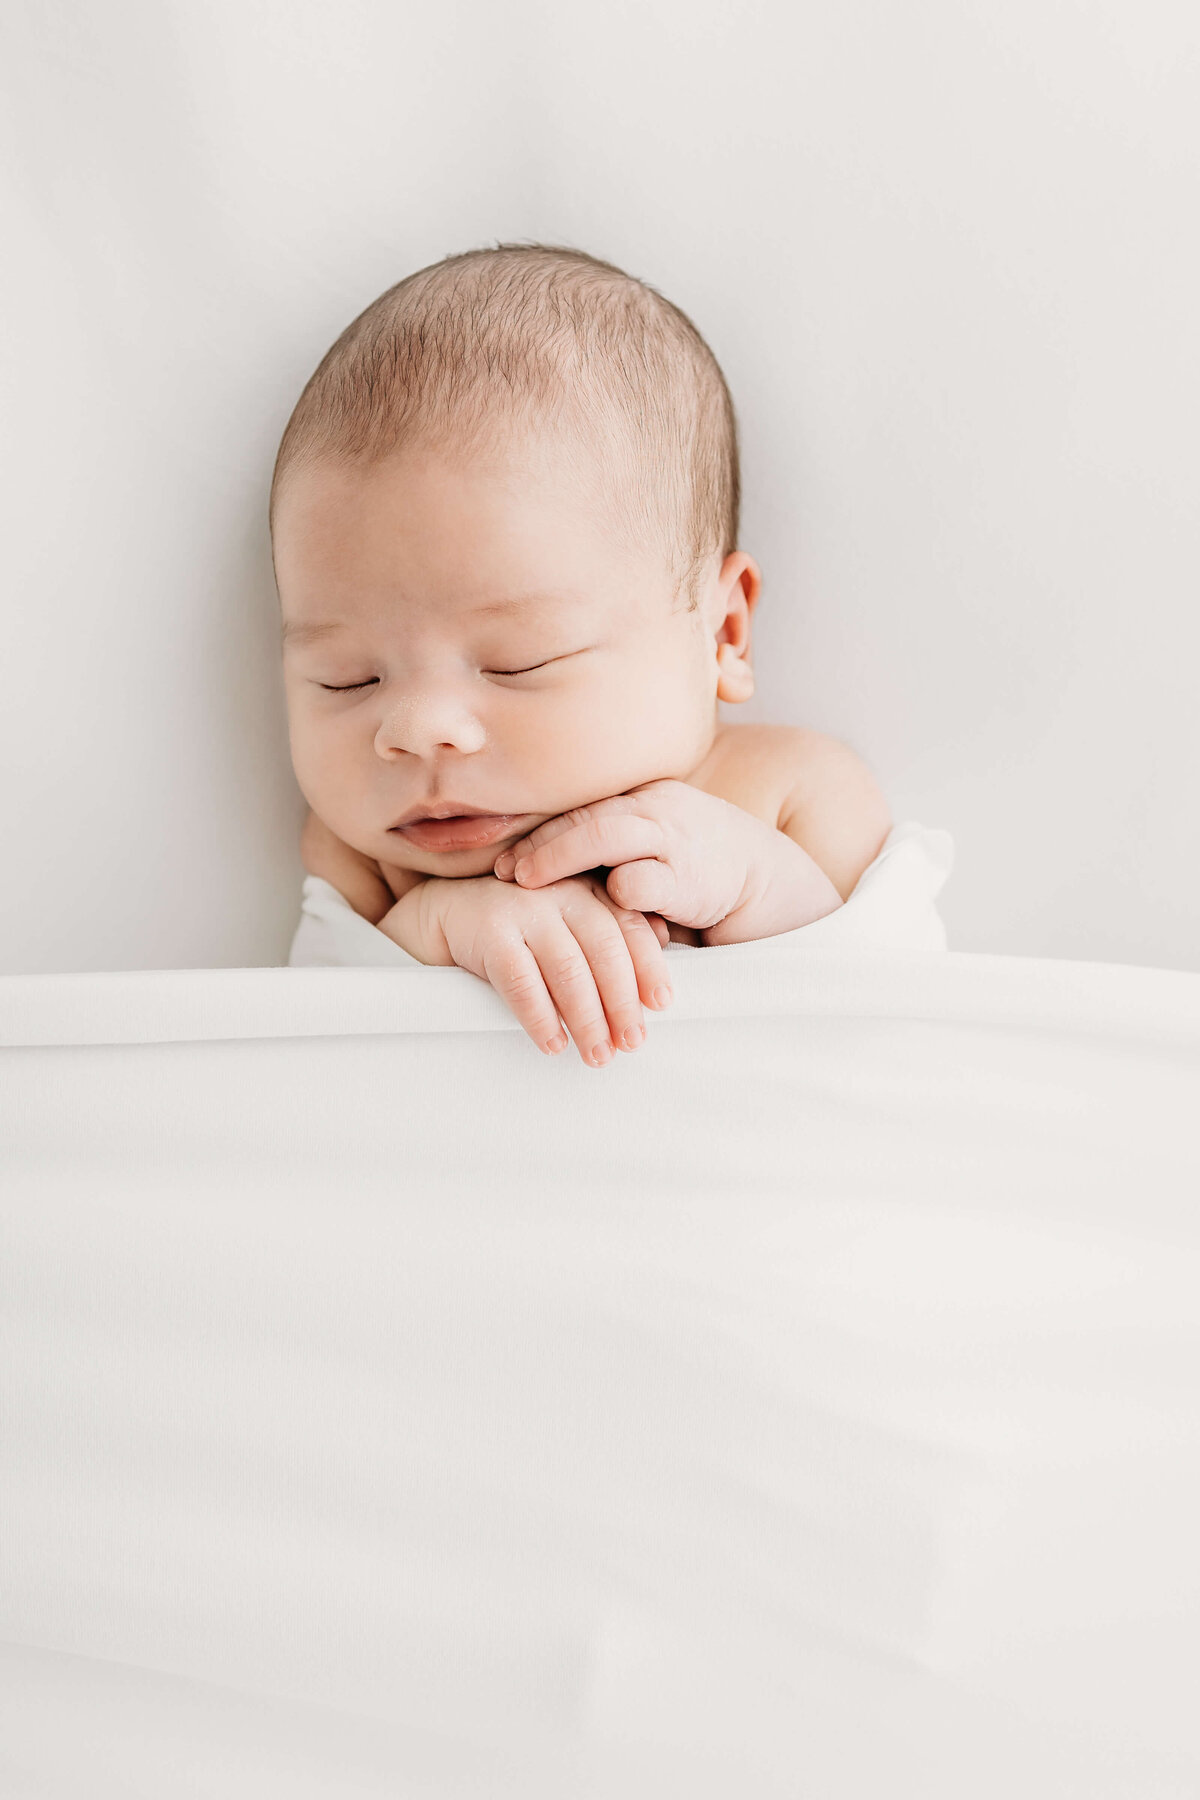 Tiny baby asleep in all white background by Luci Levon Photography